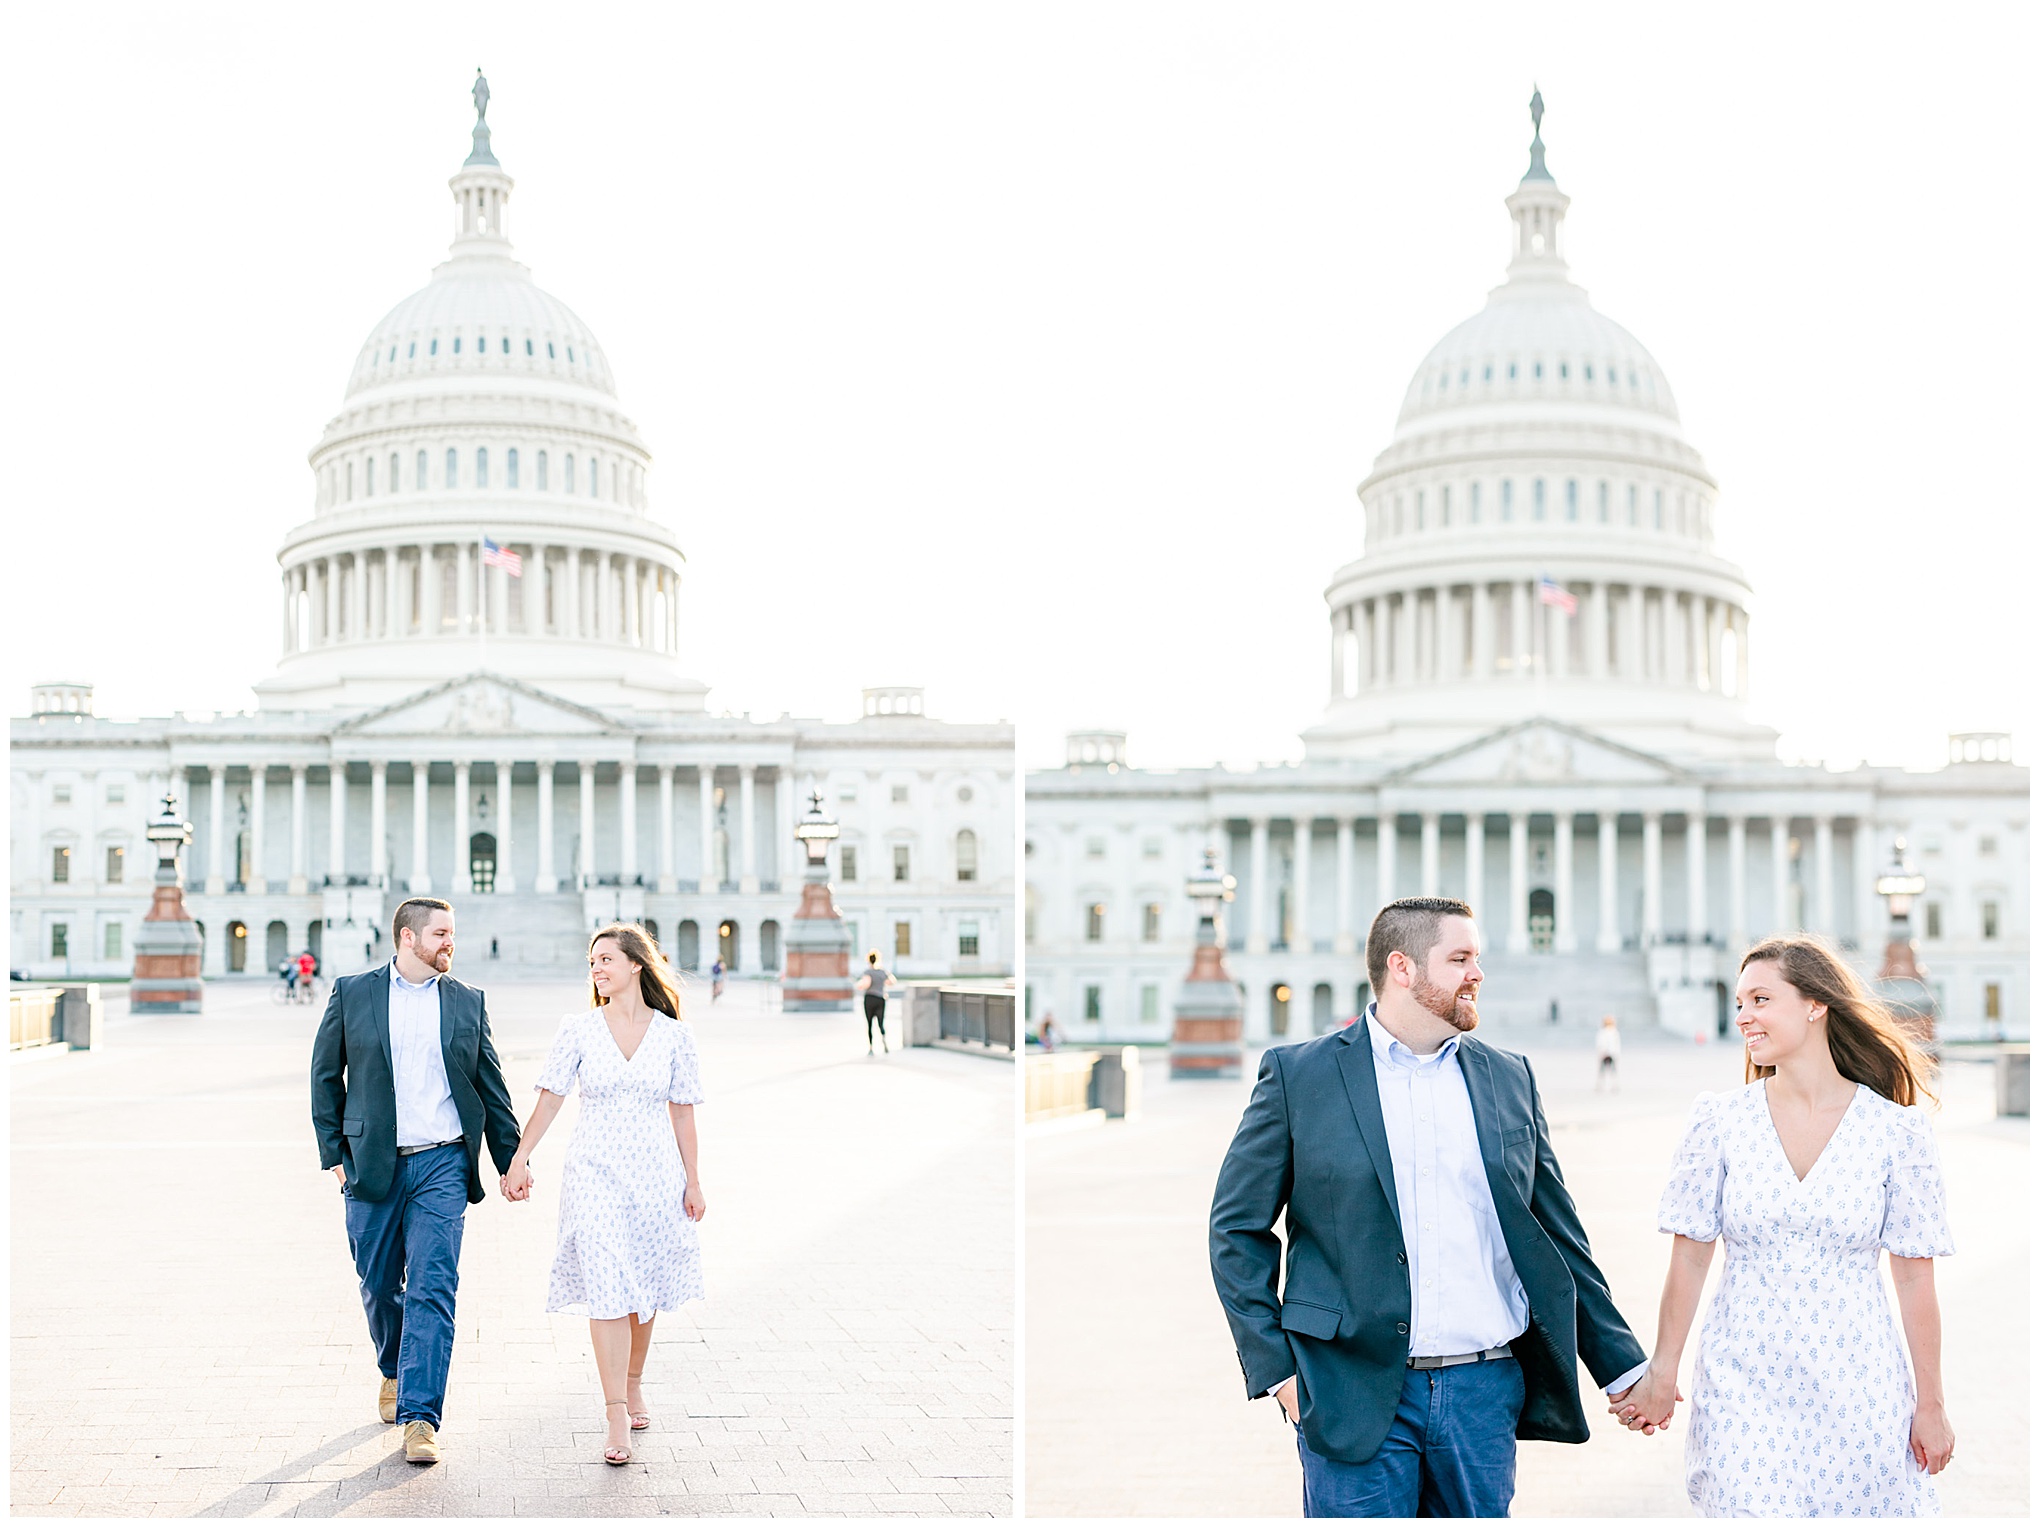 Capitol Hill engagement session, Capitol Hill portraits, D.C. engagement photography, D.C. engagement photographer, D.C. Capitol Hill D.C., DC photography, engagement photography, Rachel E.H. Photography, classic engagement photos, spring engagement photos, couple walking